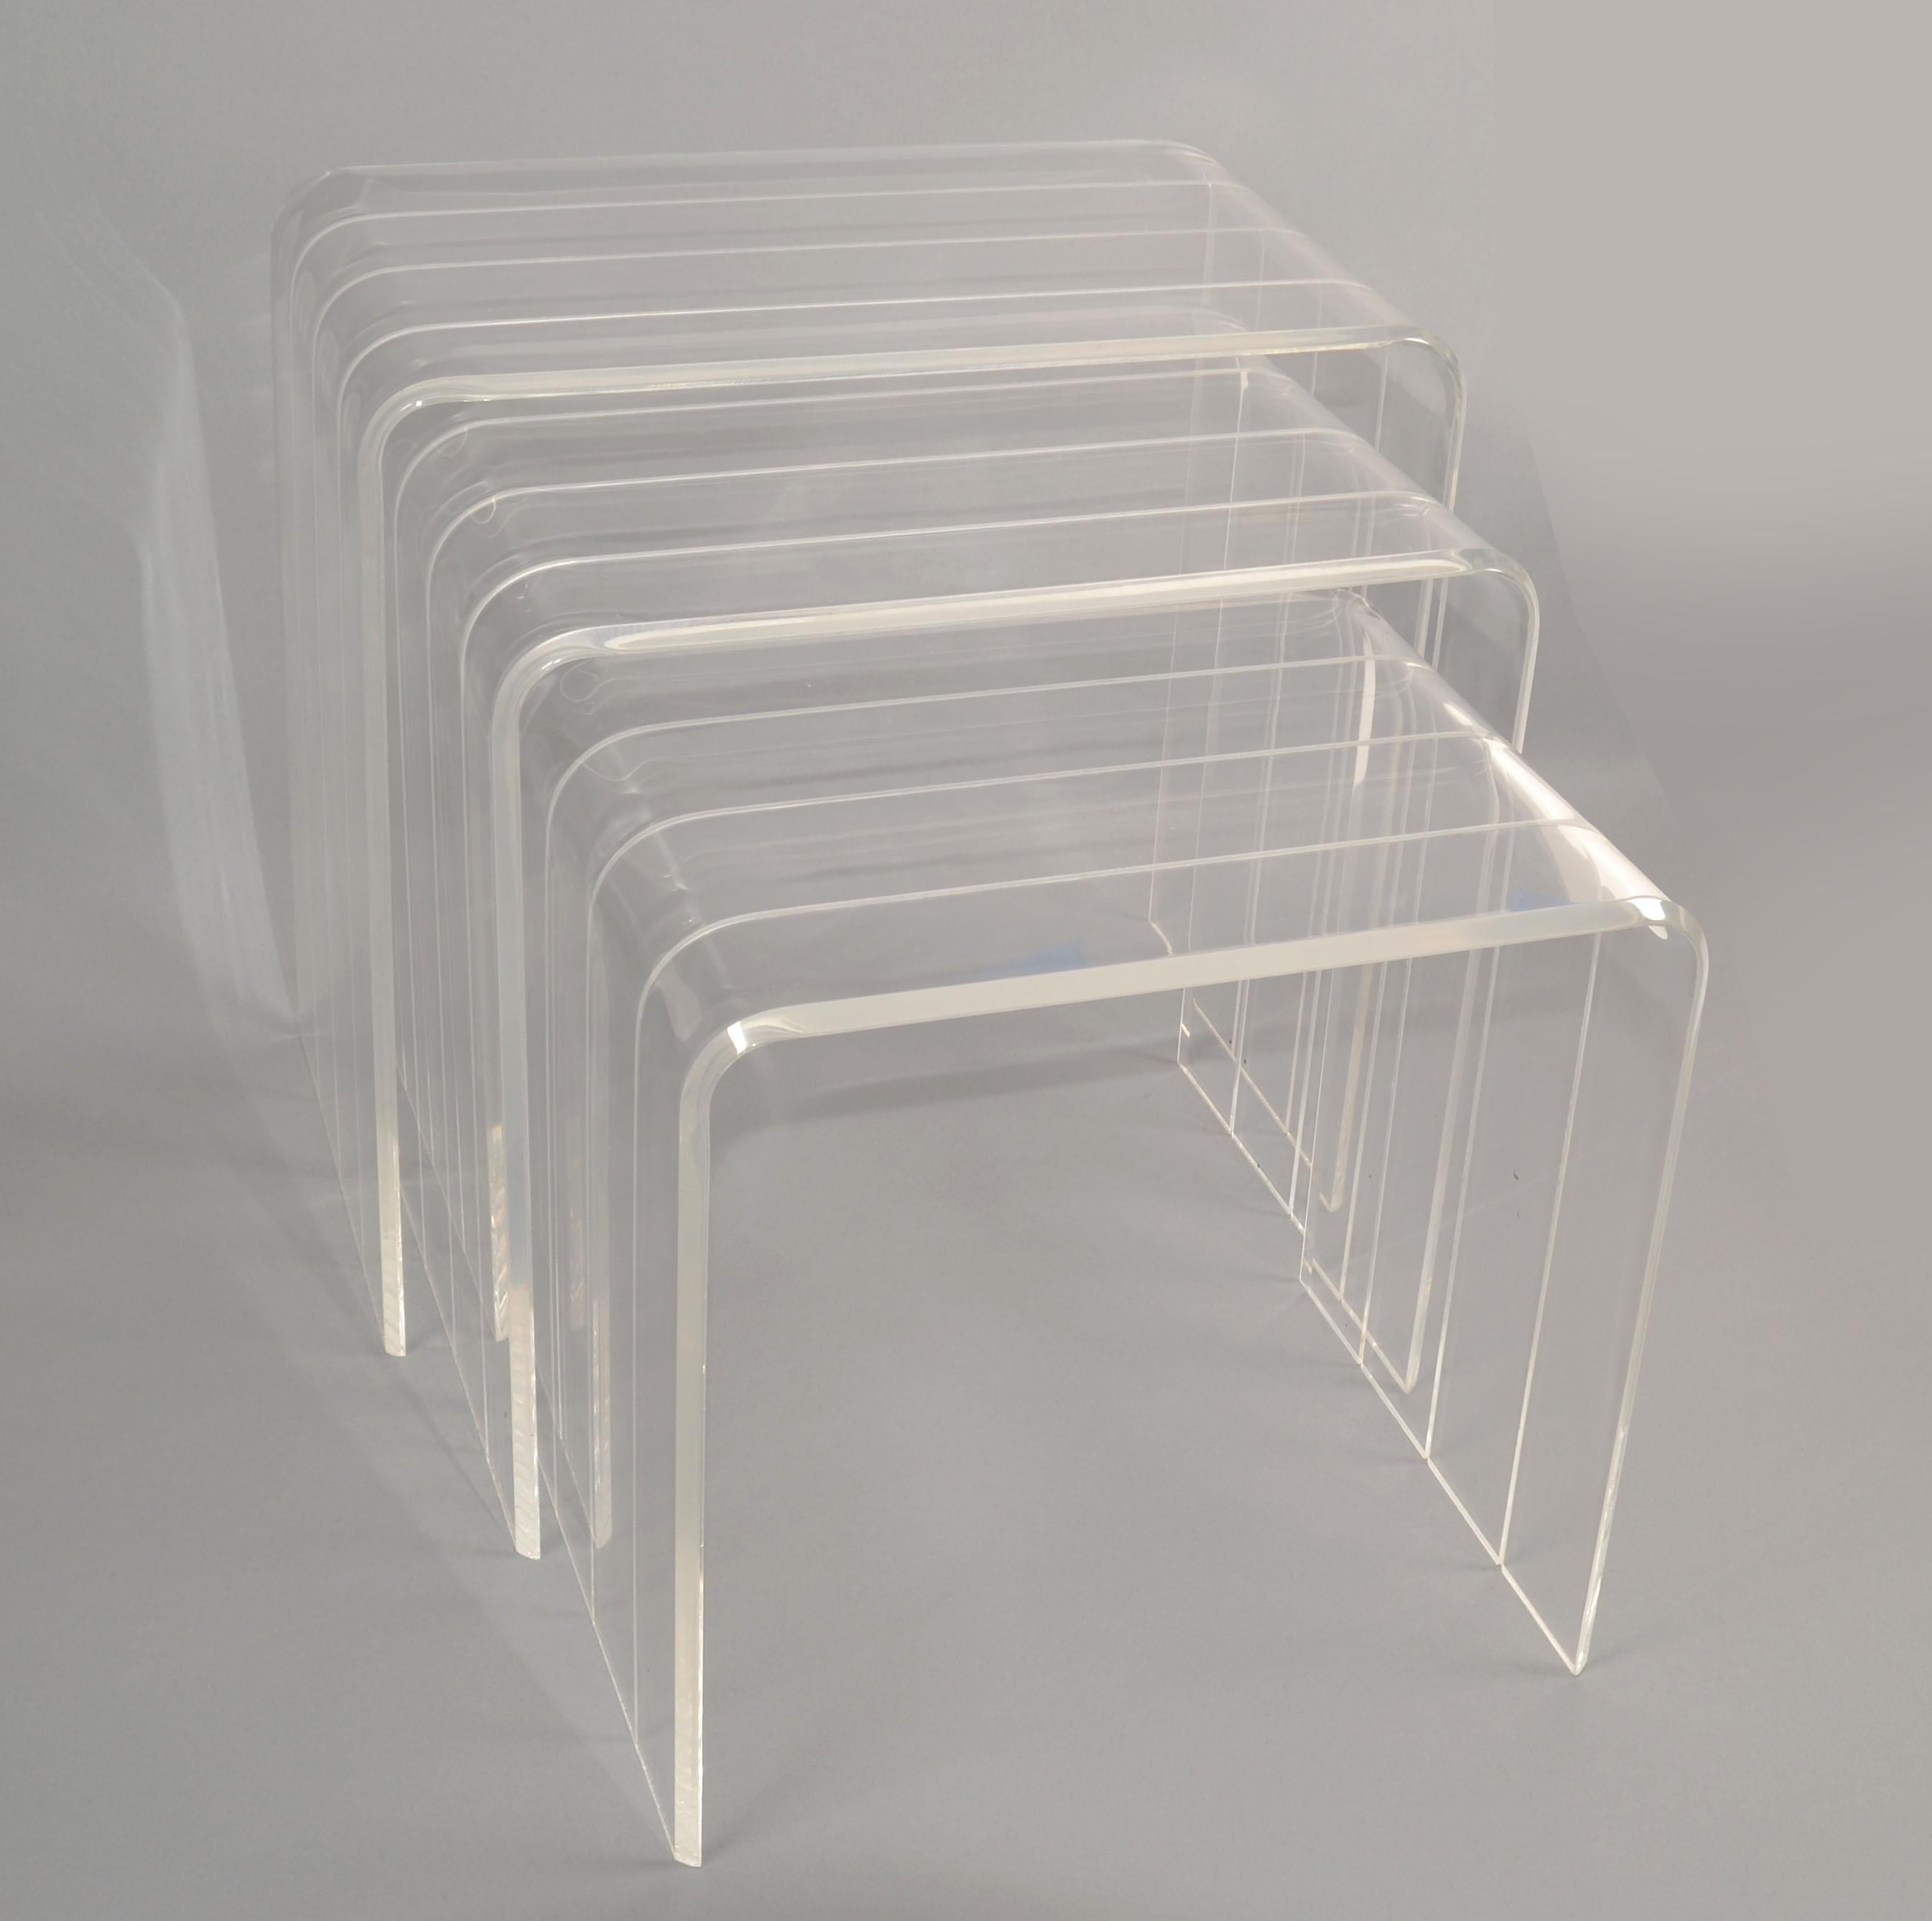 Set of 3 Italian Mid-Century Modern handcrafted and etched waterfall Nesting Tables, Stacking Tables, Stools.
Deco Revival Lucite Drink Tables made in Italy circa 1970.
Newly polished and in very good condition, ready for a new Home.
Size of each